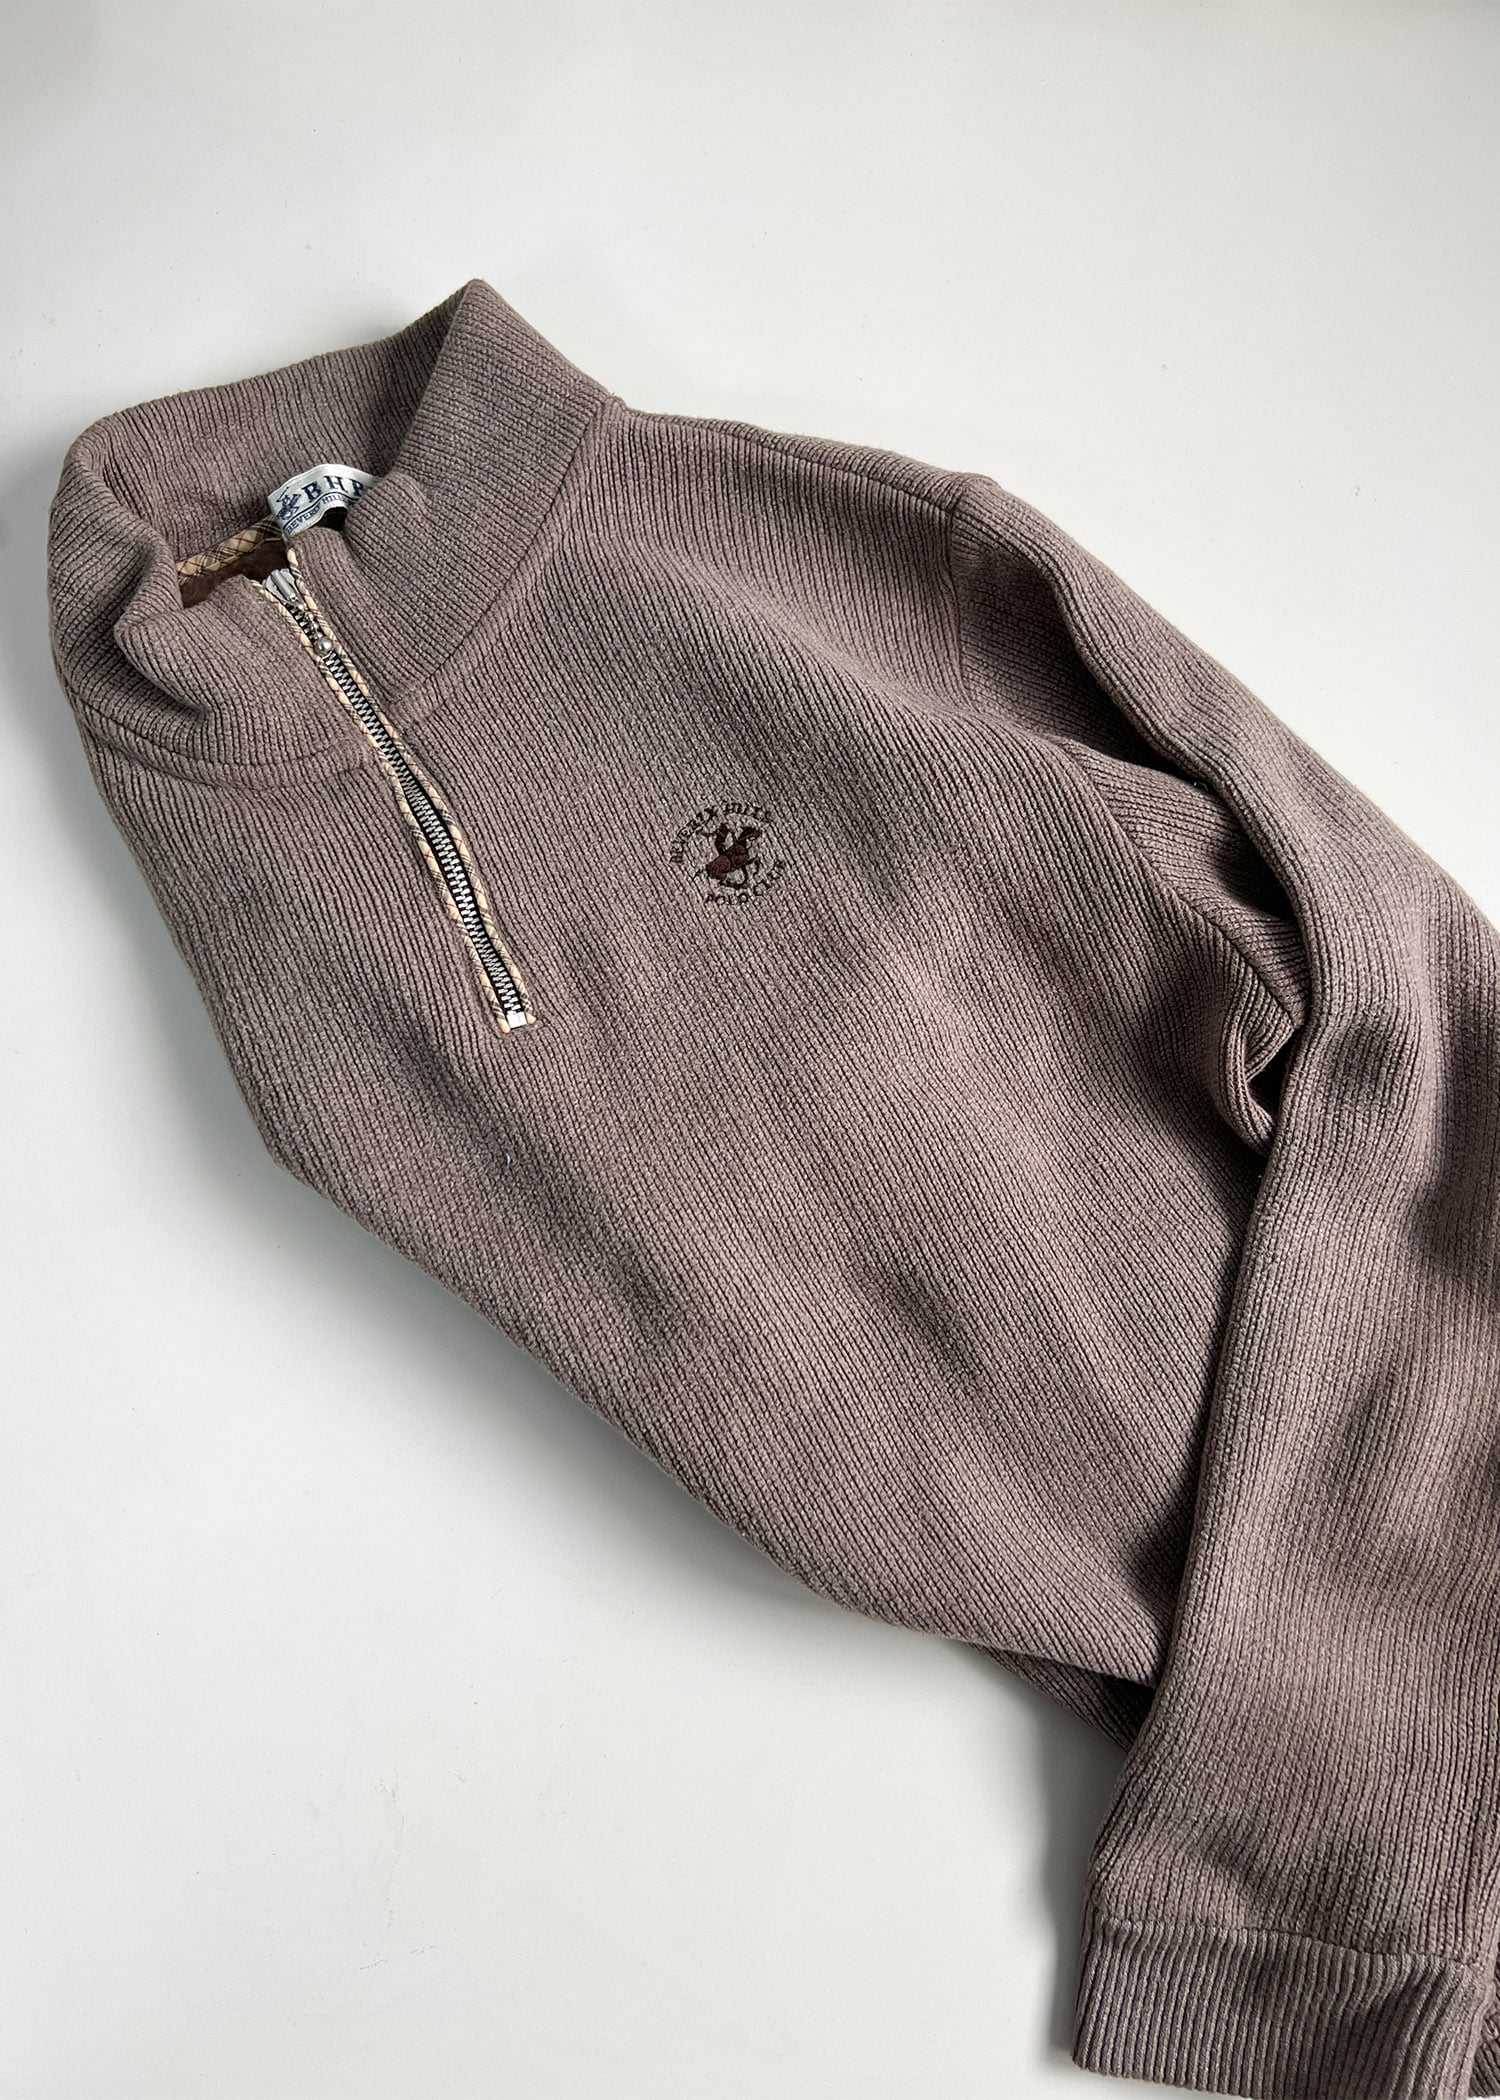 Bervery hills polo club pullover